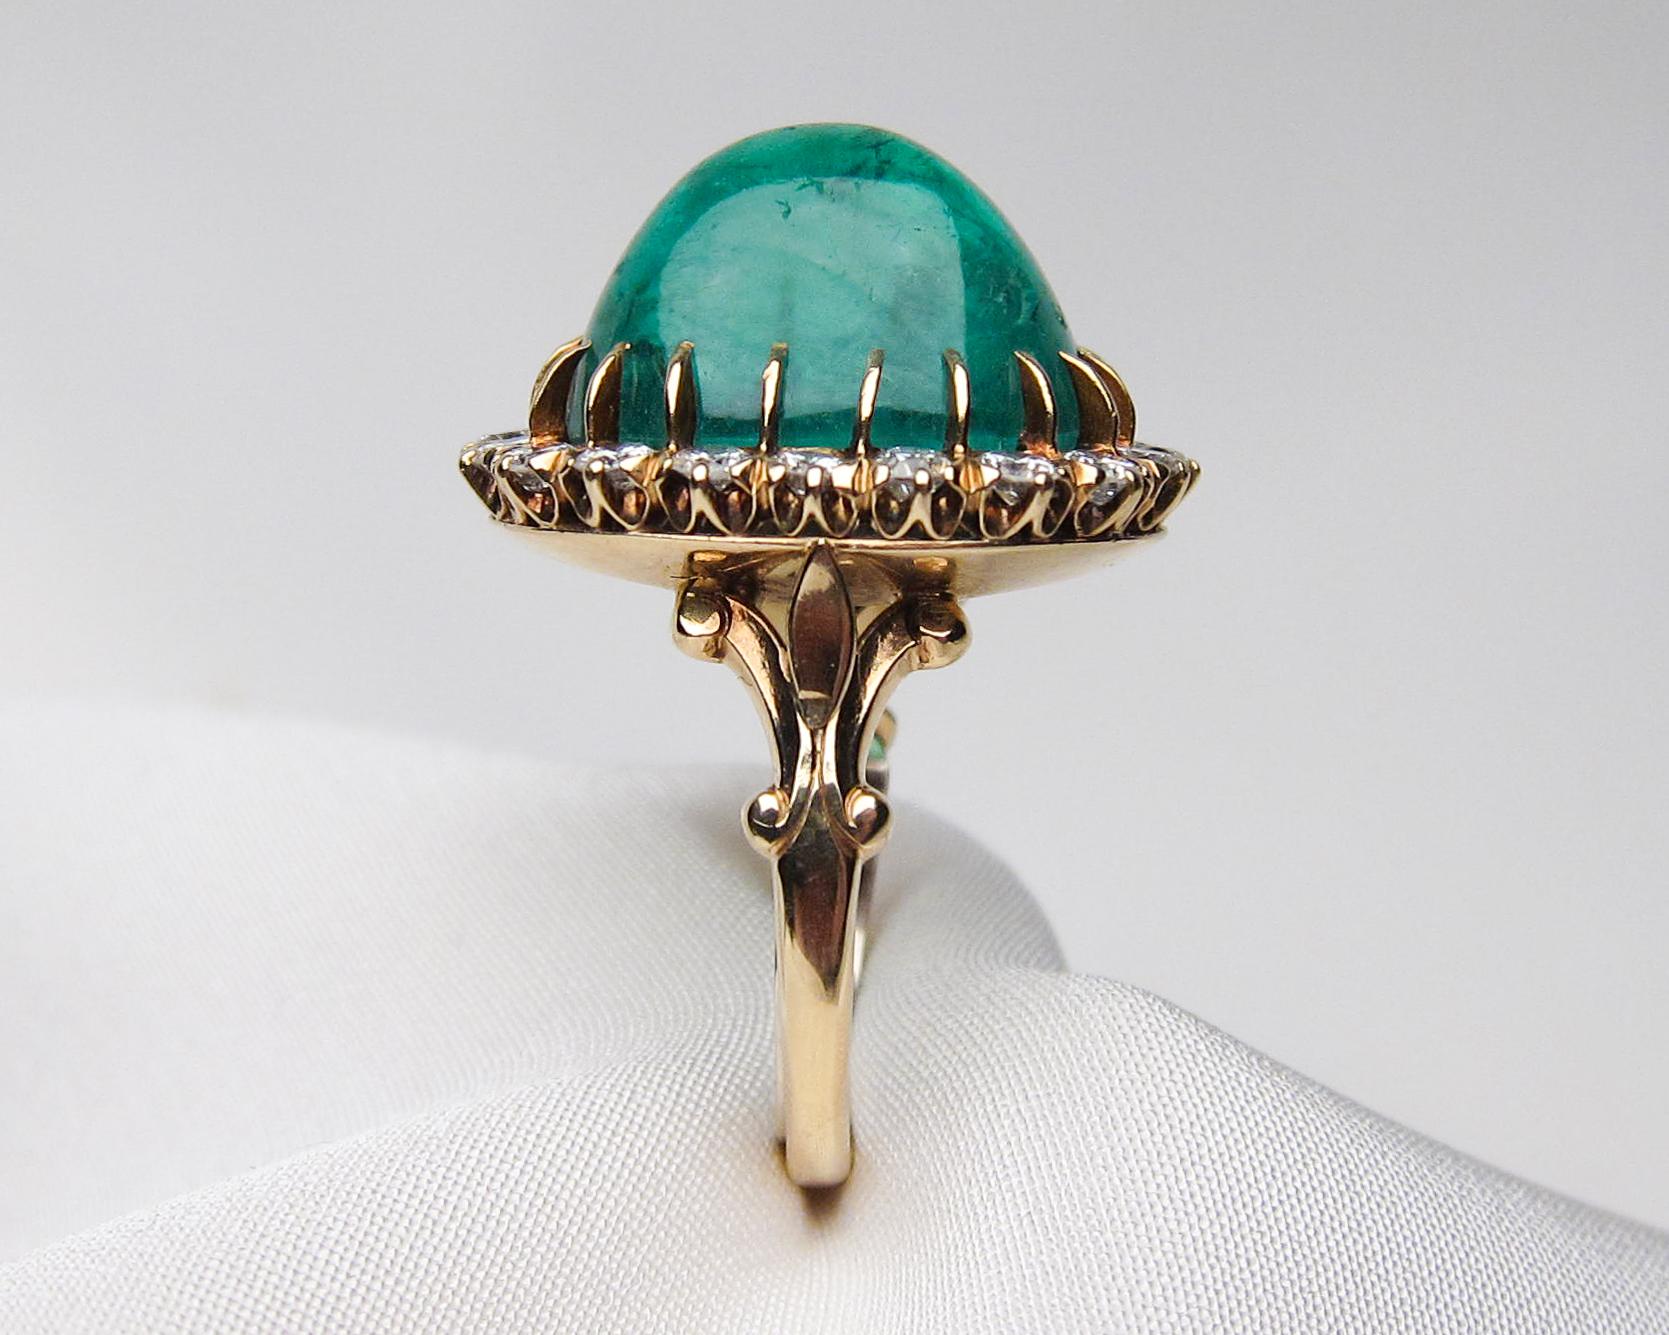 14K Gold 1.60 Ct Diamond and 27.60 Ct Emerald Cabochon Cocktail Ring, Circa 1940 In Excellent Condition For Sale In Seattle, WA